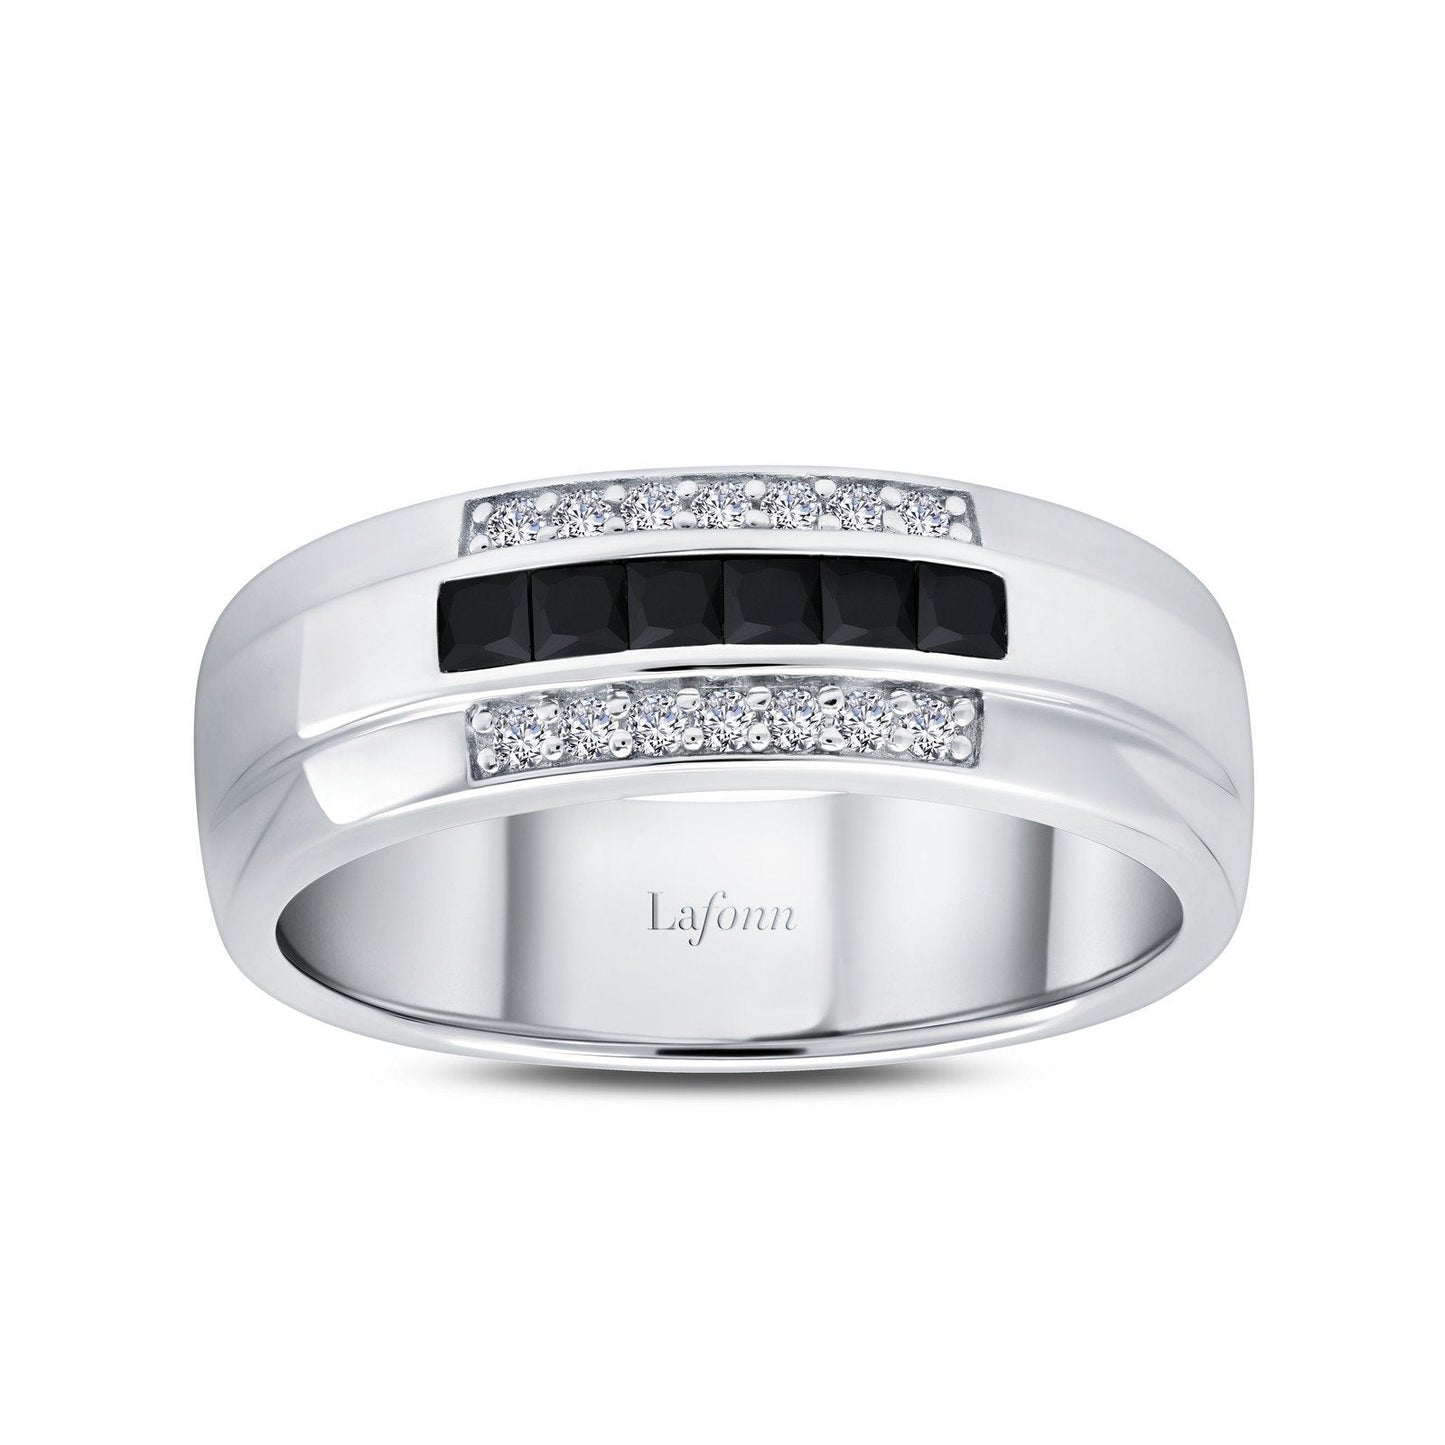 Lafonn 0.74 CTW Men's Wedding Band Simulated Diamond RINGS Size 12 Platinum 0.74 CTS Approx. 6.65mm (W)